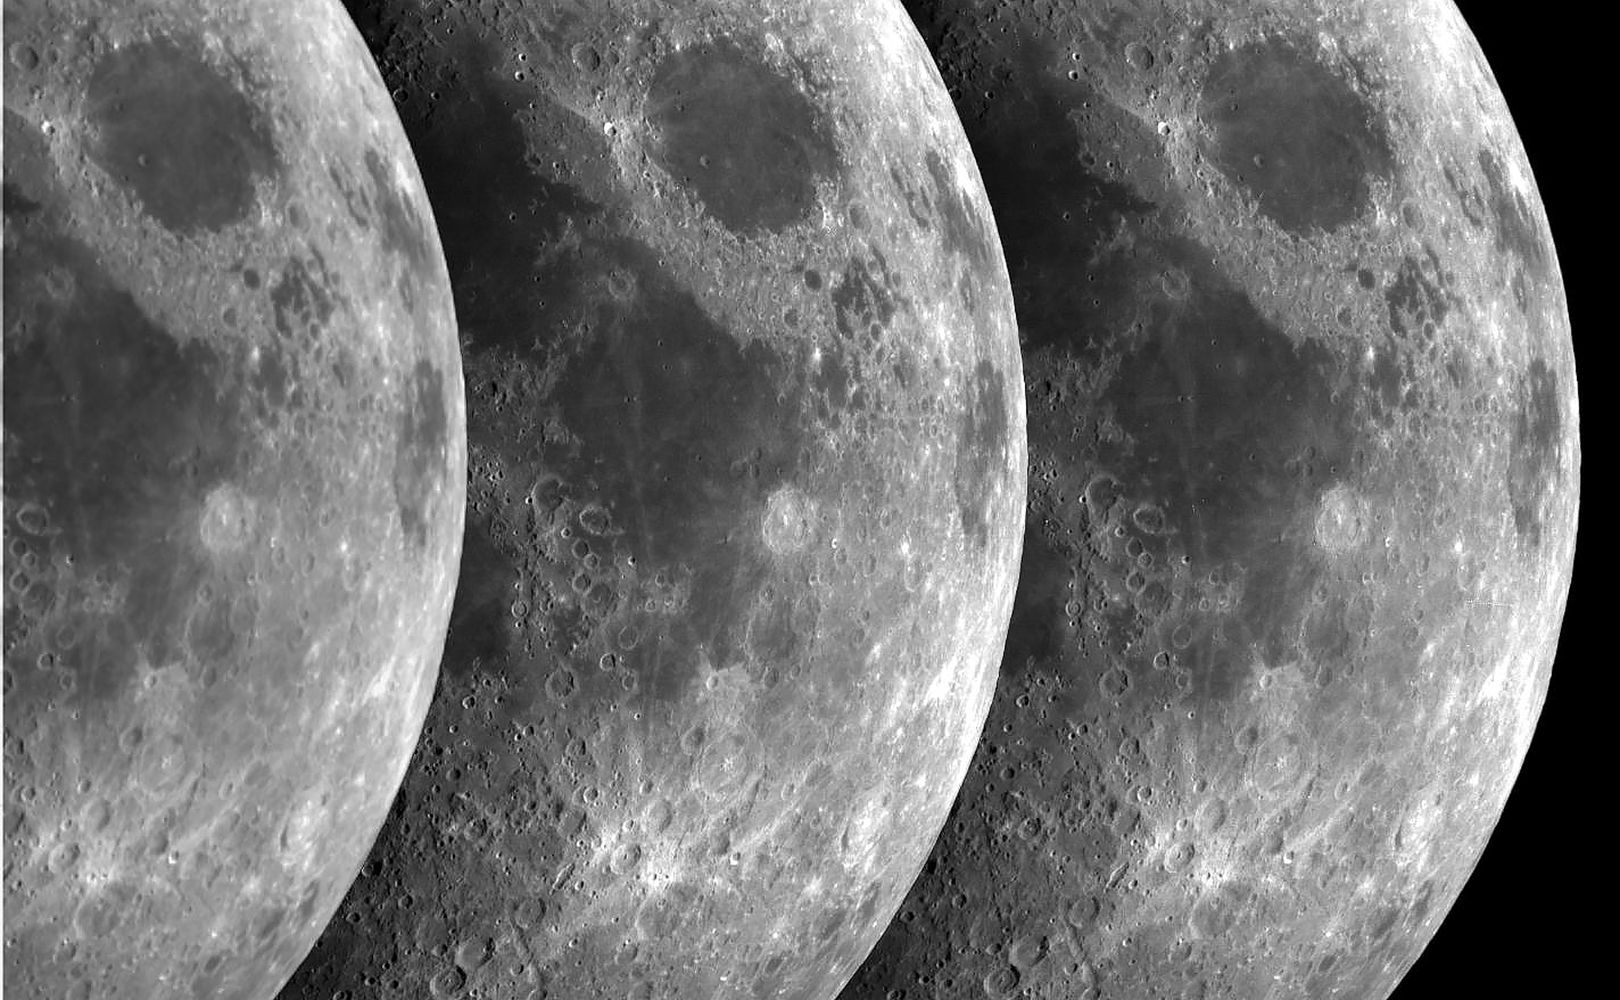 The moon is shrinking.  What are the implications for astronauts?